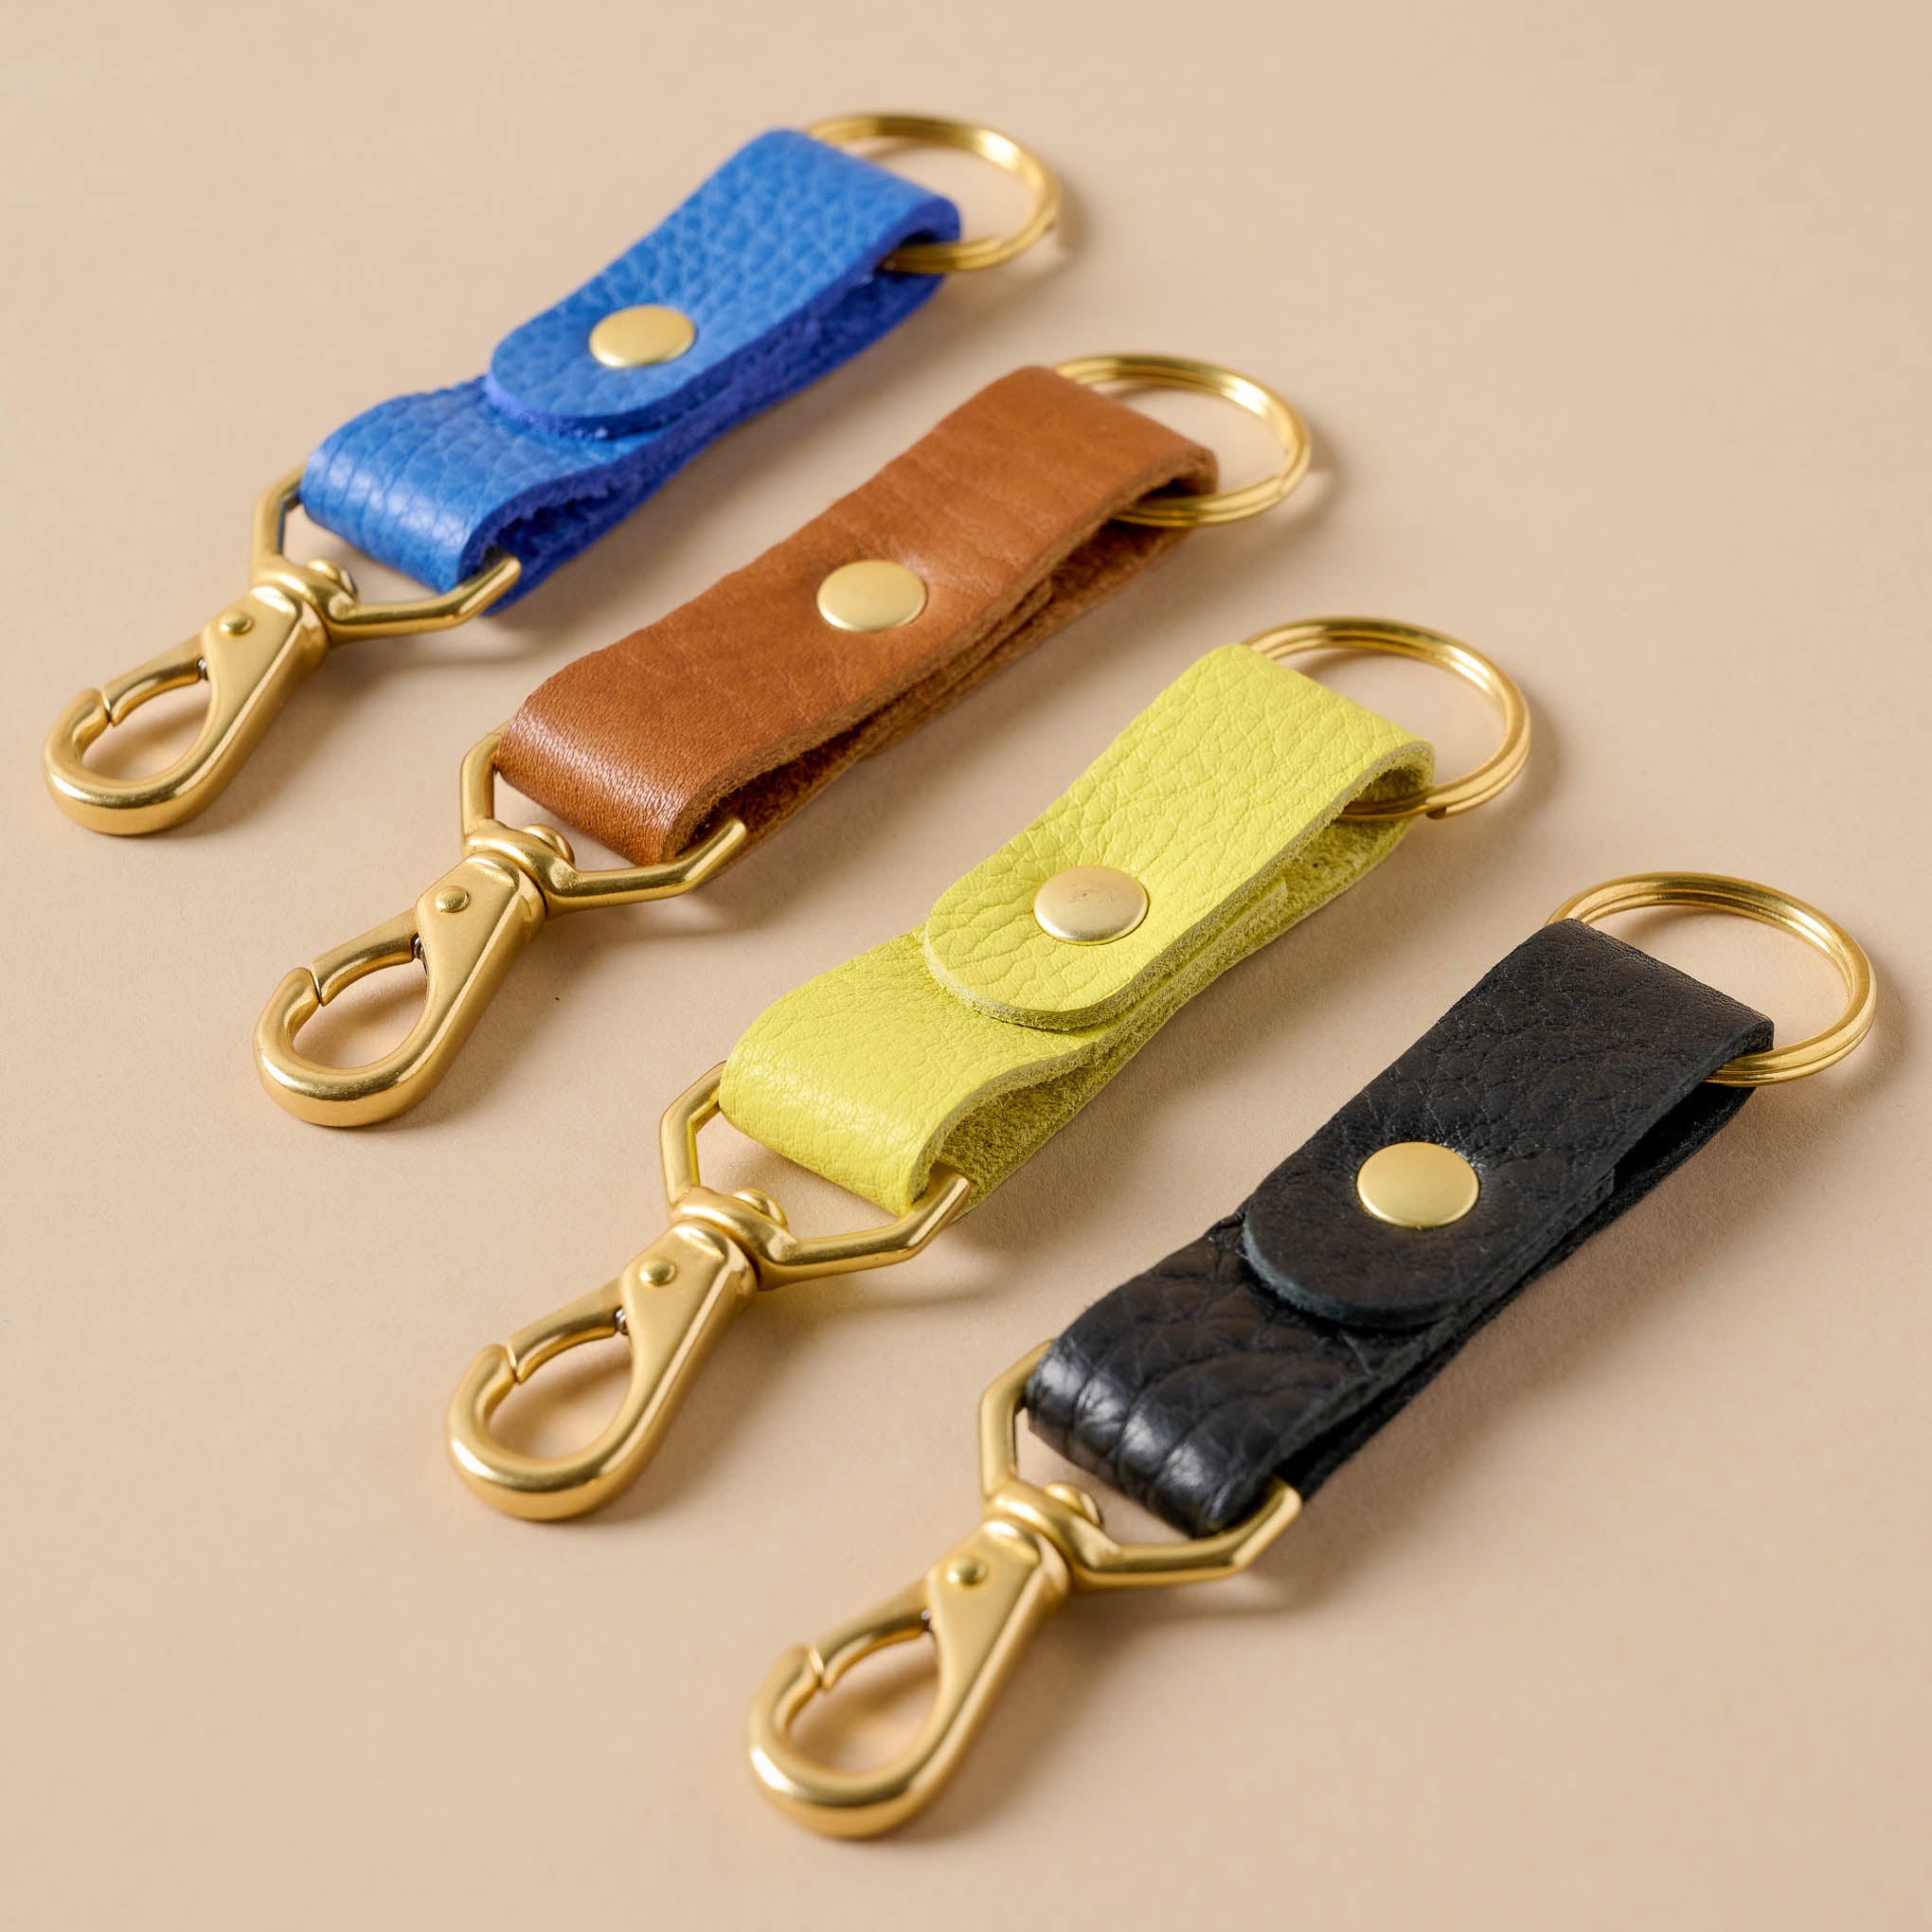 Luna Leather Keychain in blue, yellow, cognac, and black On sale for $14.40, discounted from $18.00